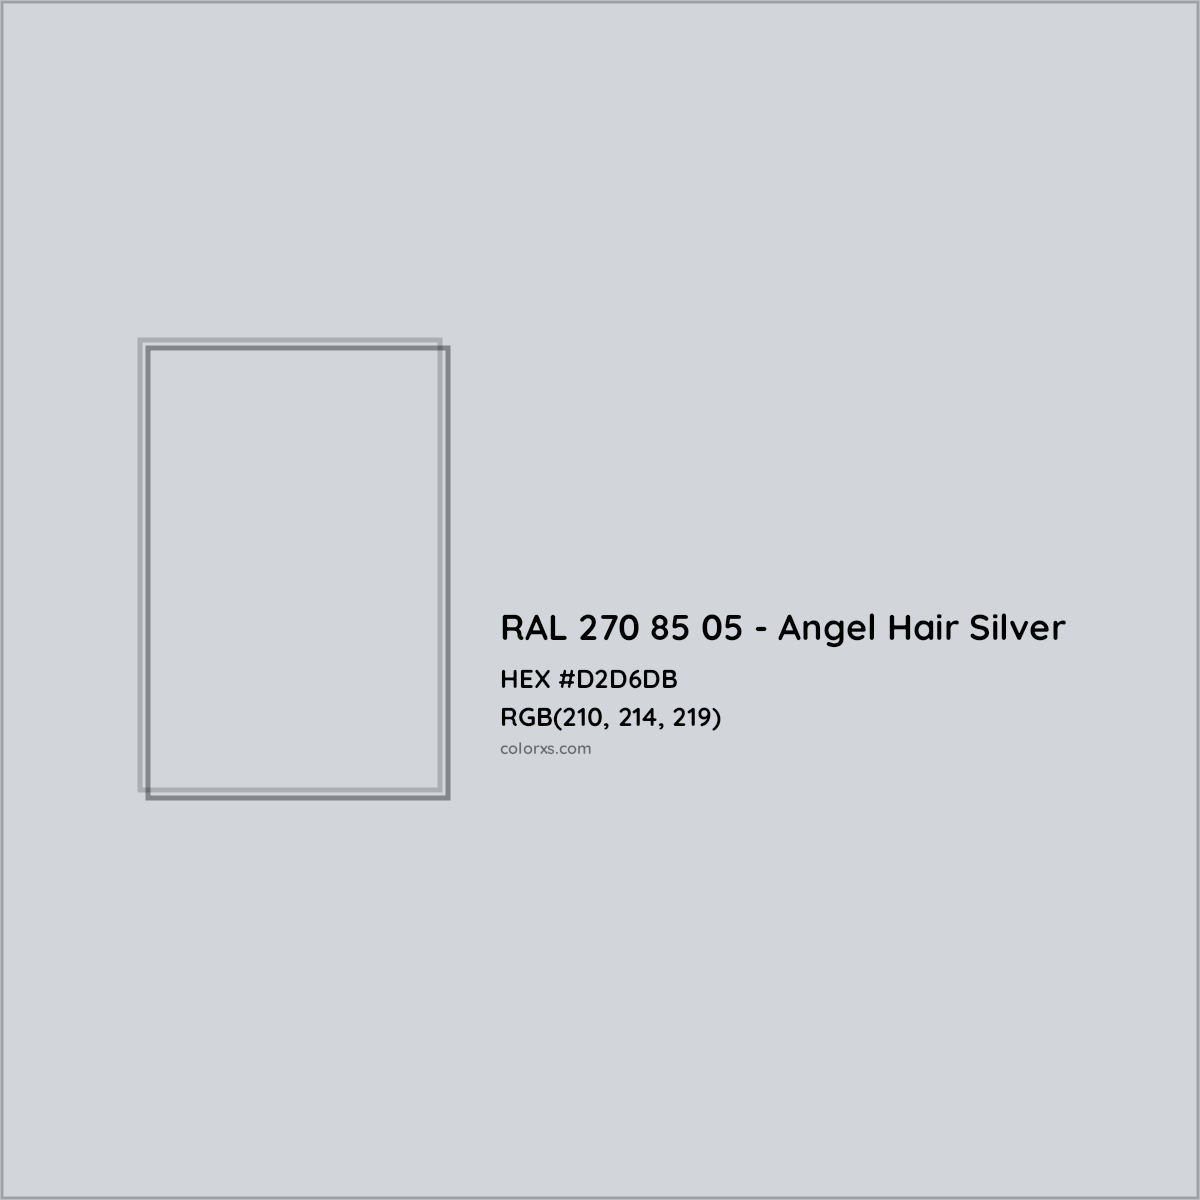 HEX #D2D6DB RAL 270 85 05 - Angel Hair Silver CMS RAL Design - Color Code